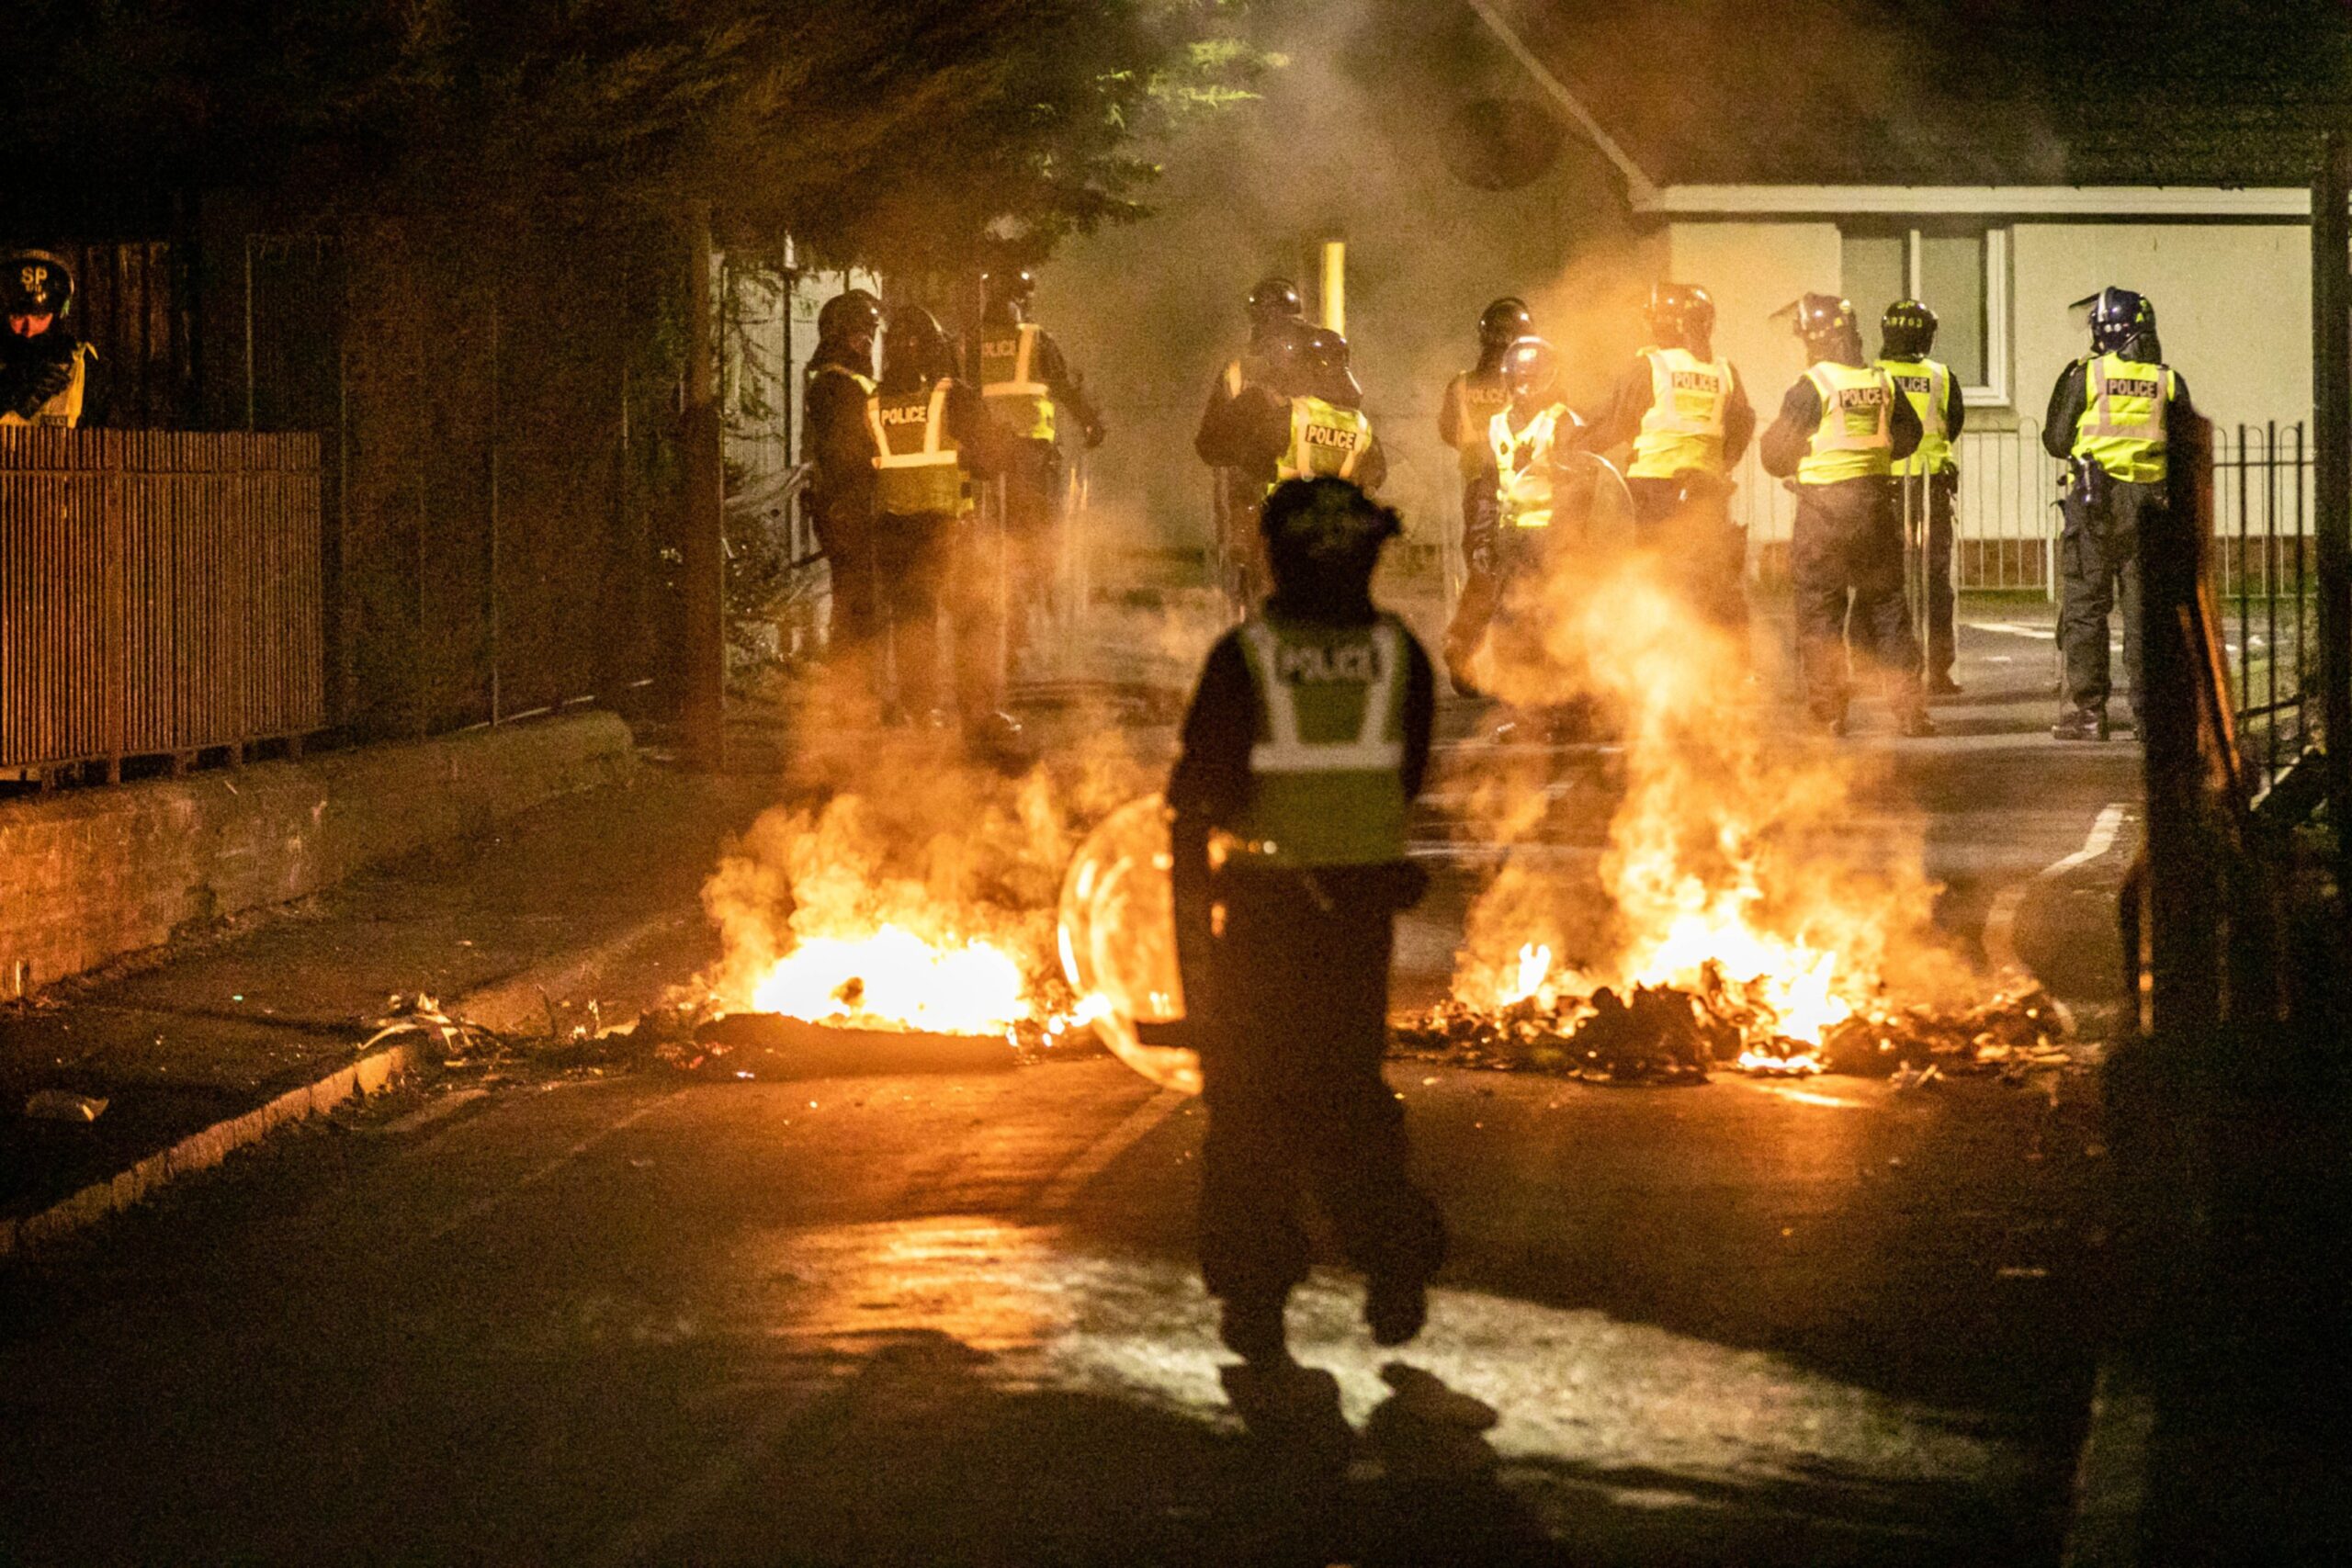 Police officers watch the street fires in Kirkton